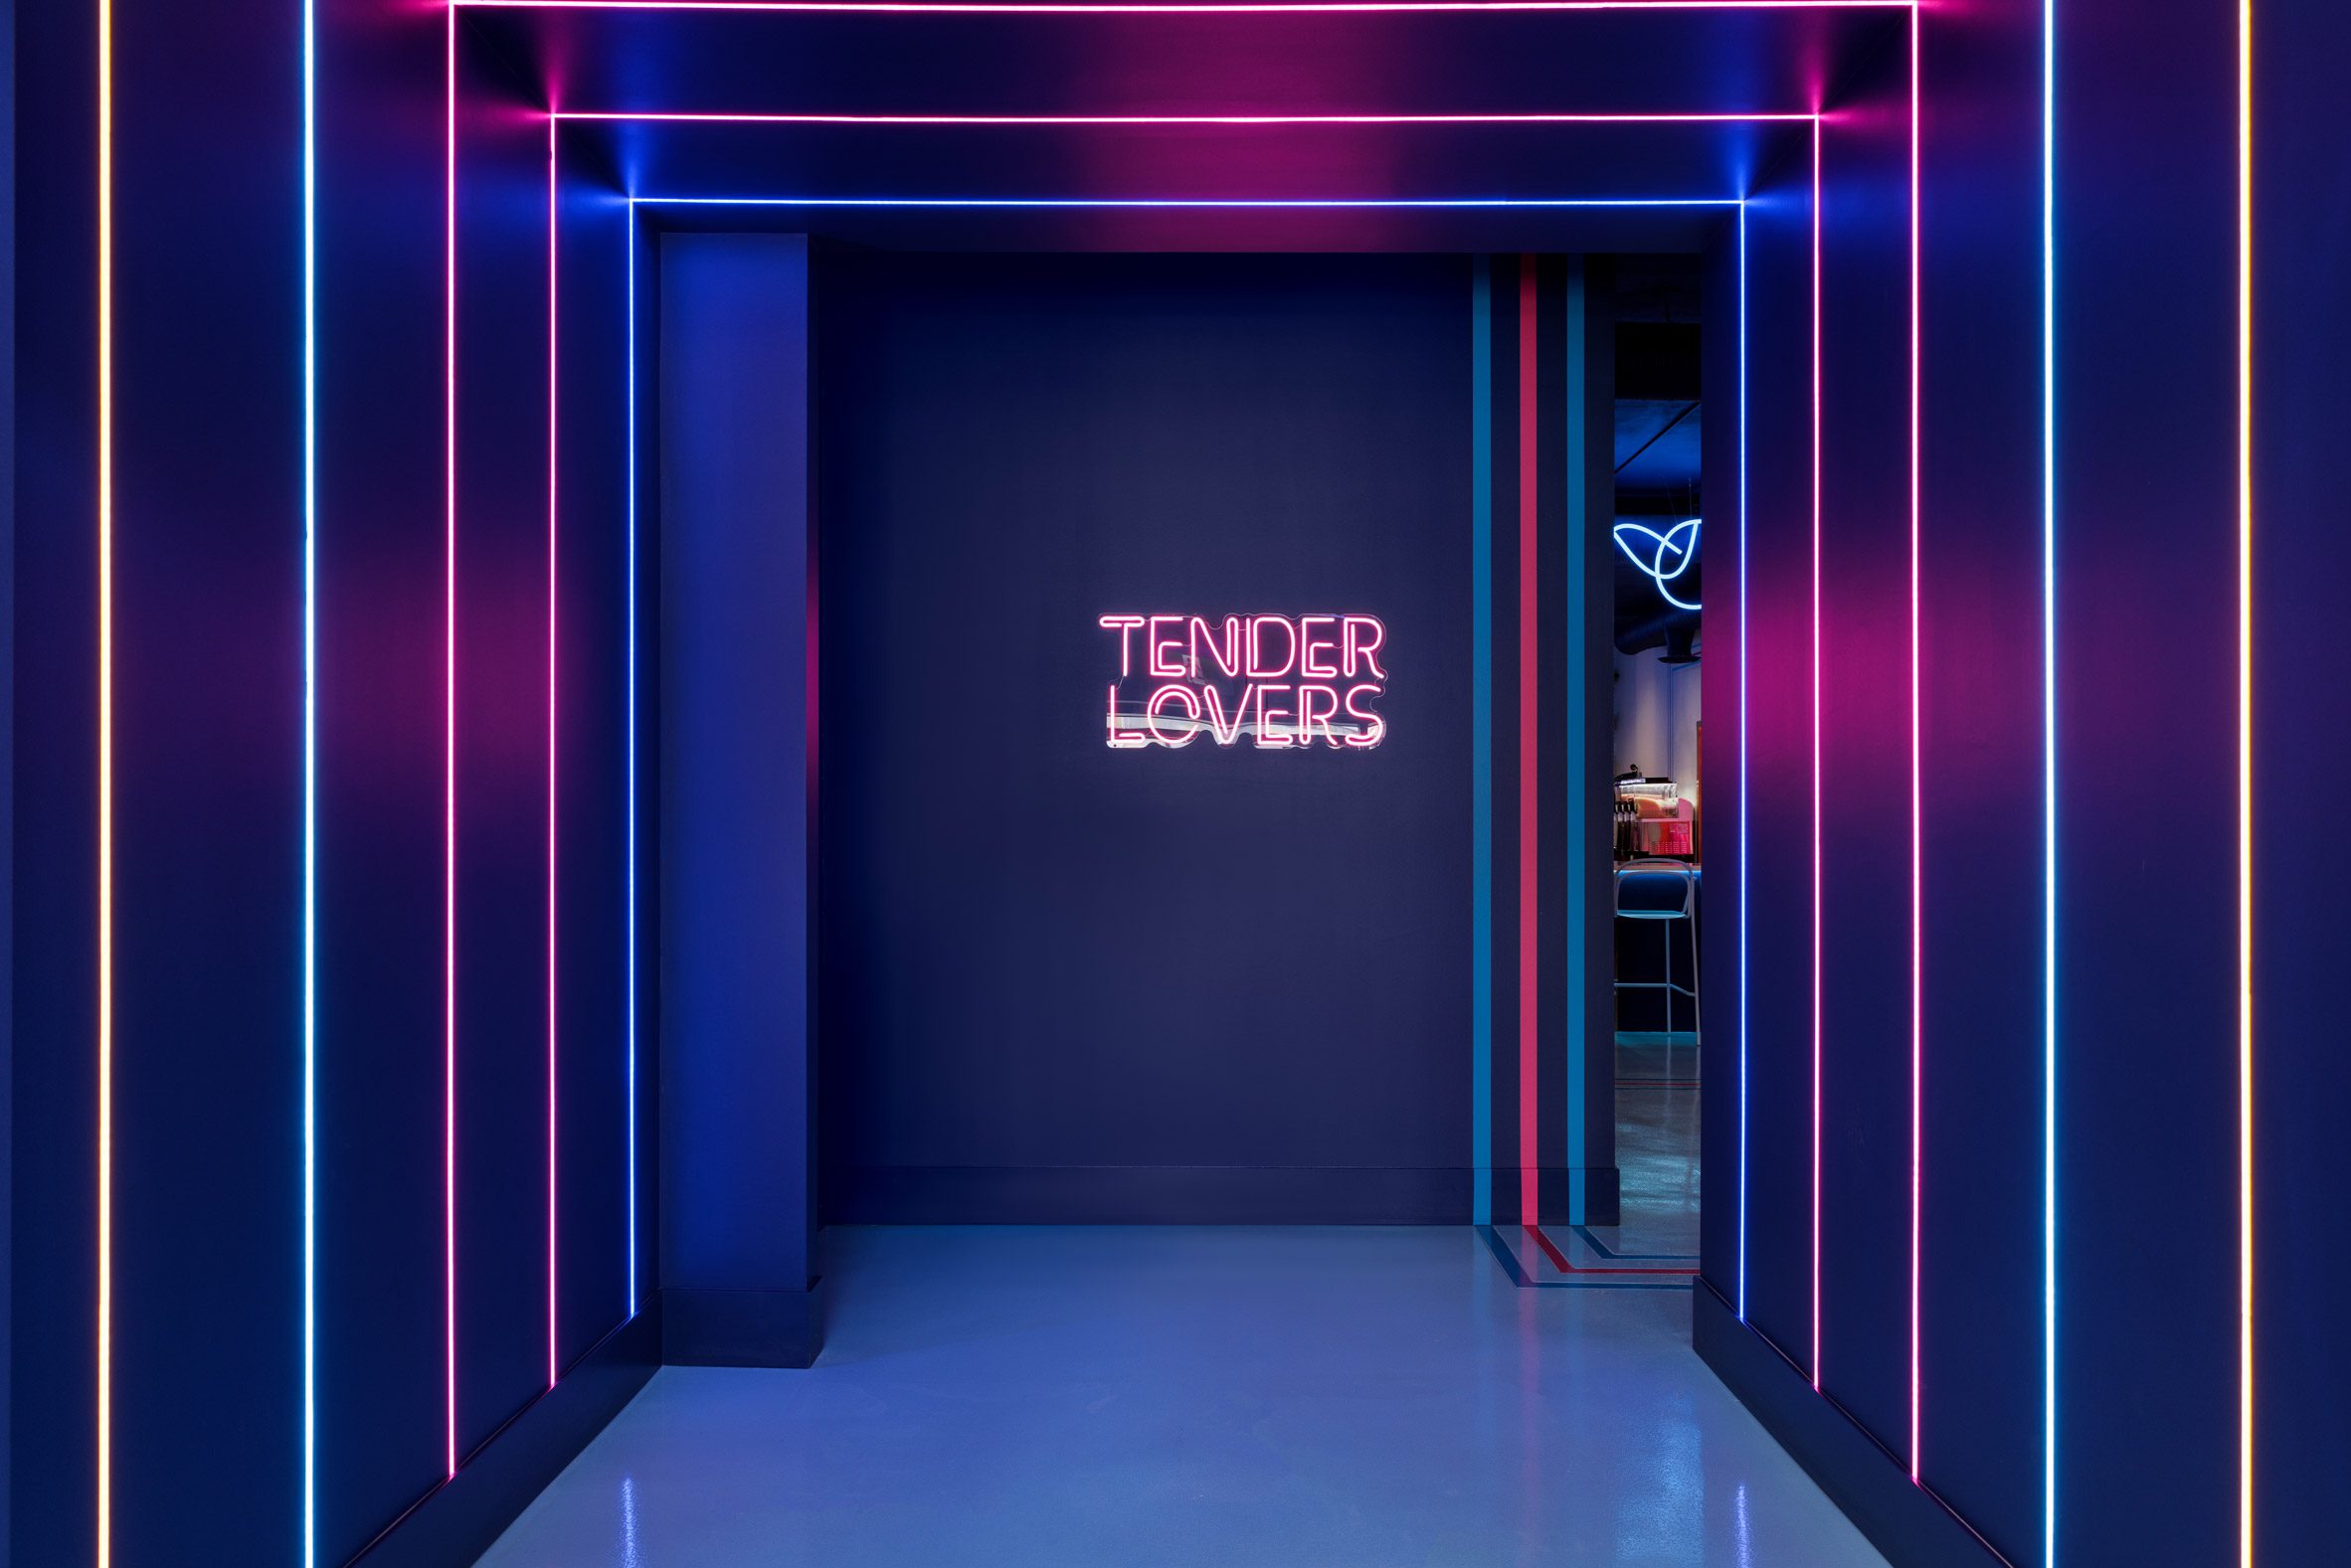 Midnight blue vestibule with neon strips across the walls and ceiling